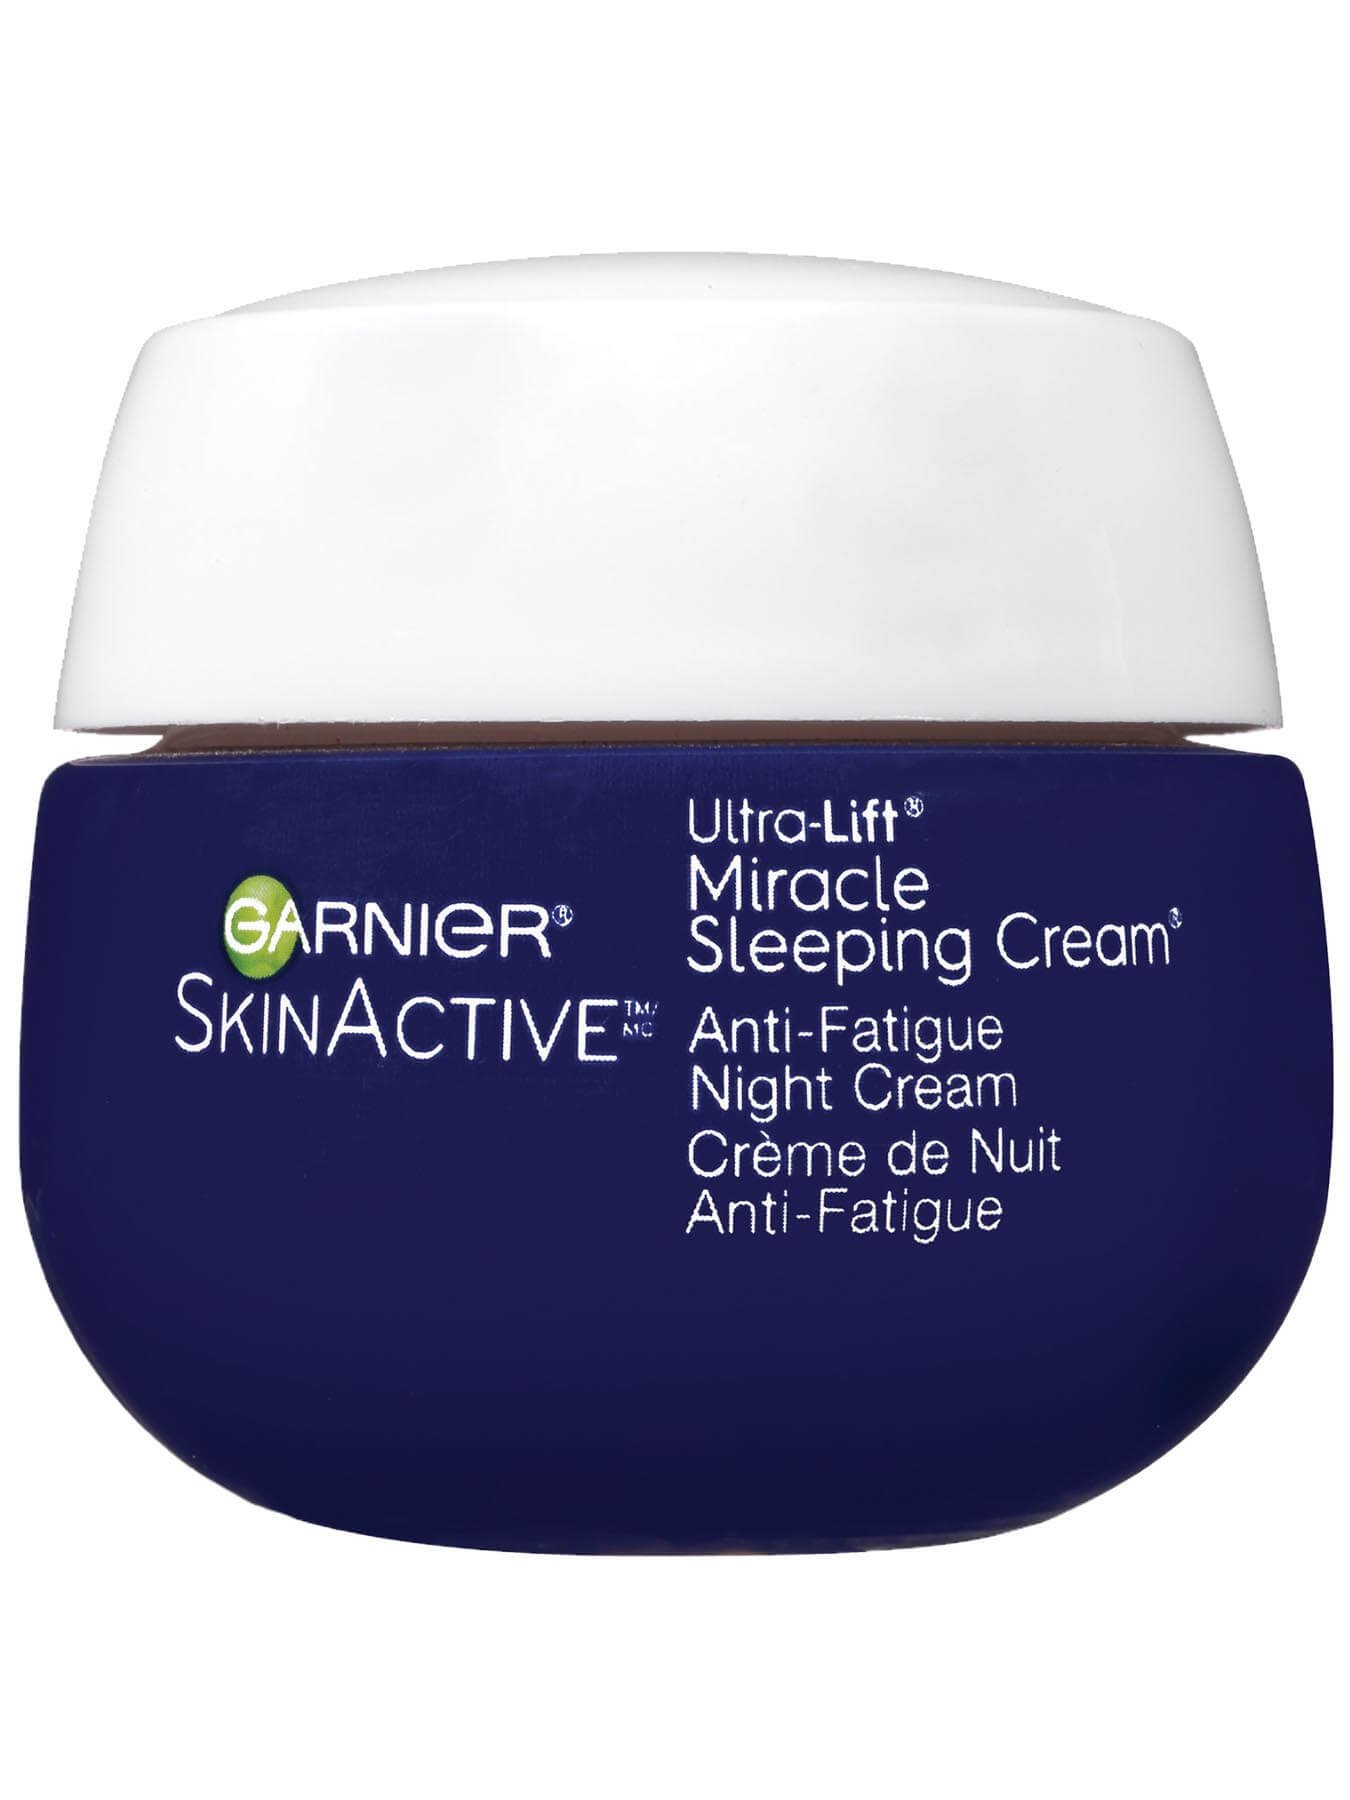 Front view of Ultra Lift Miracle Anti-Fatigue Sleeping Cream.